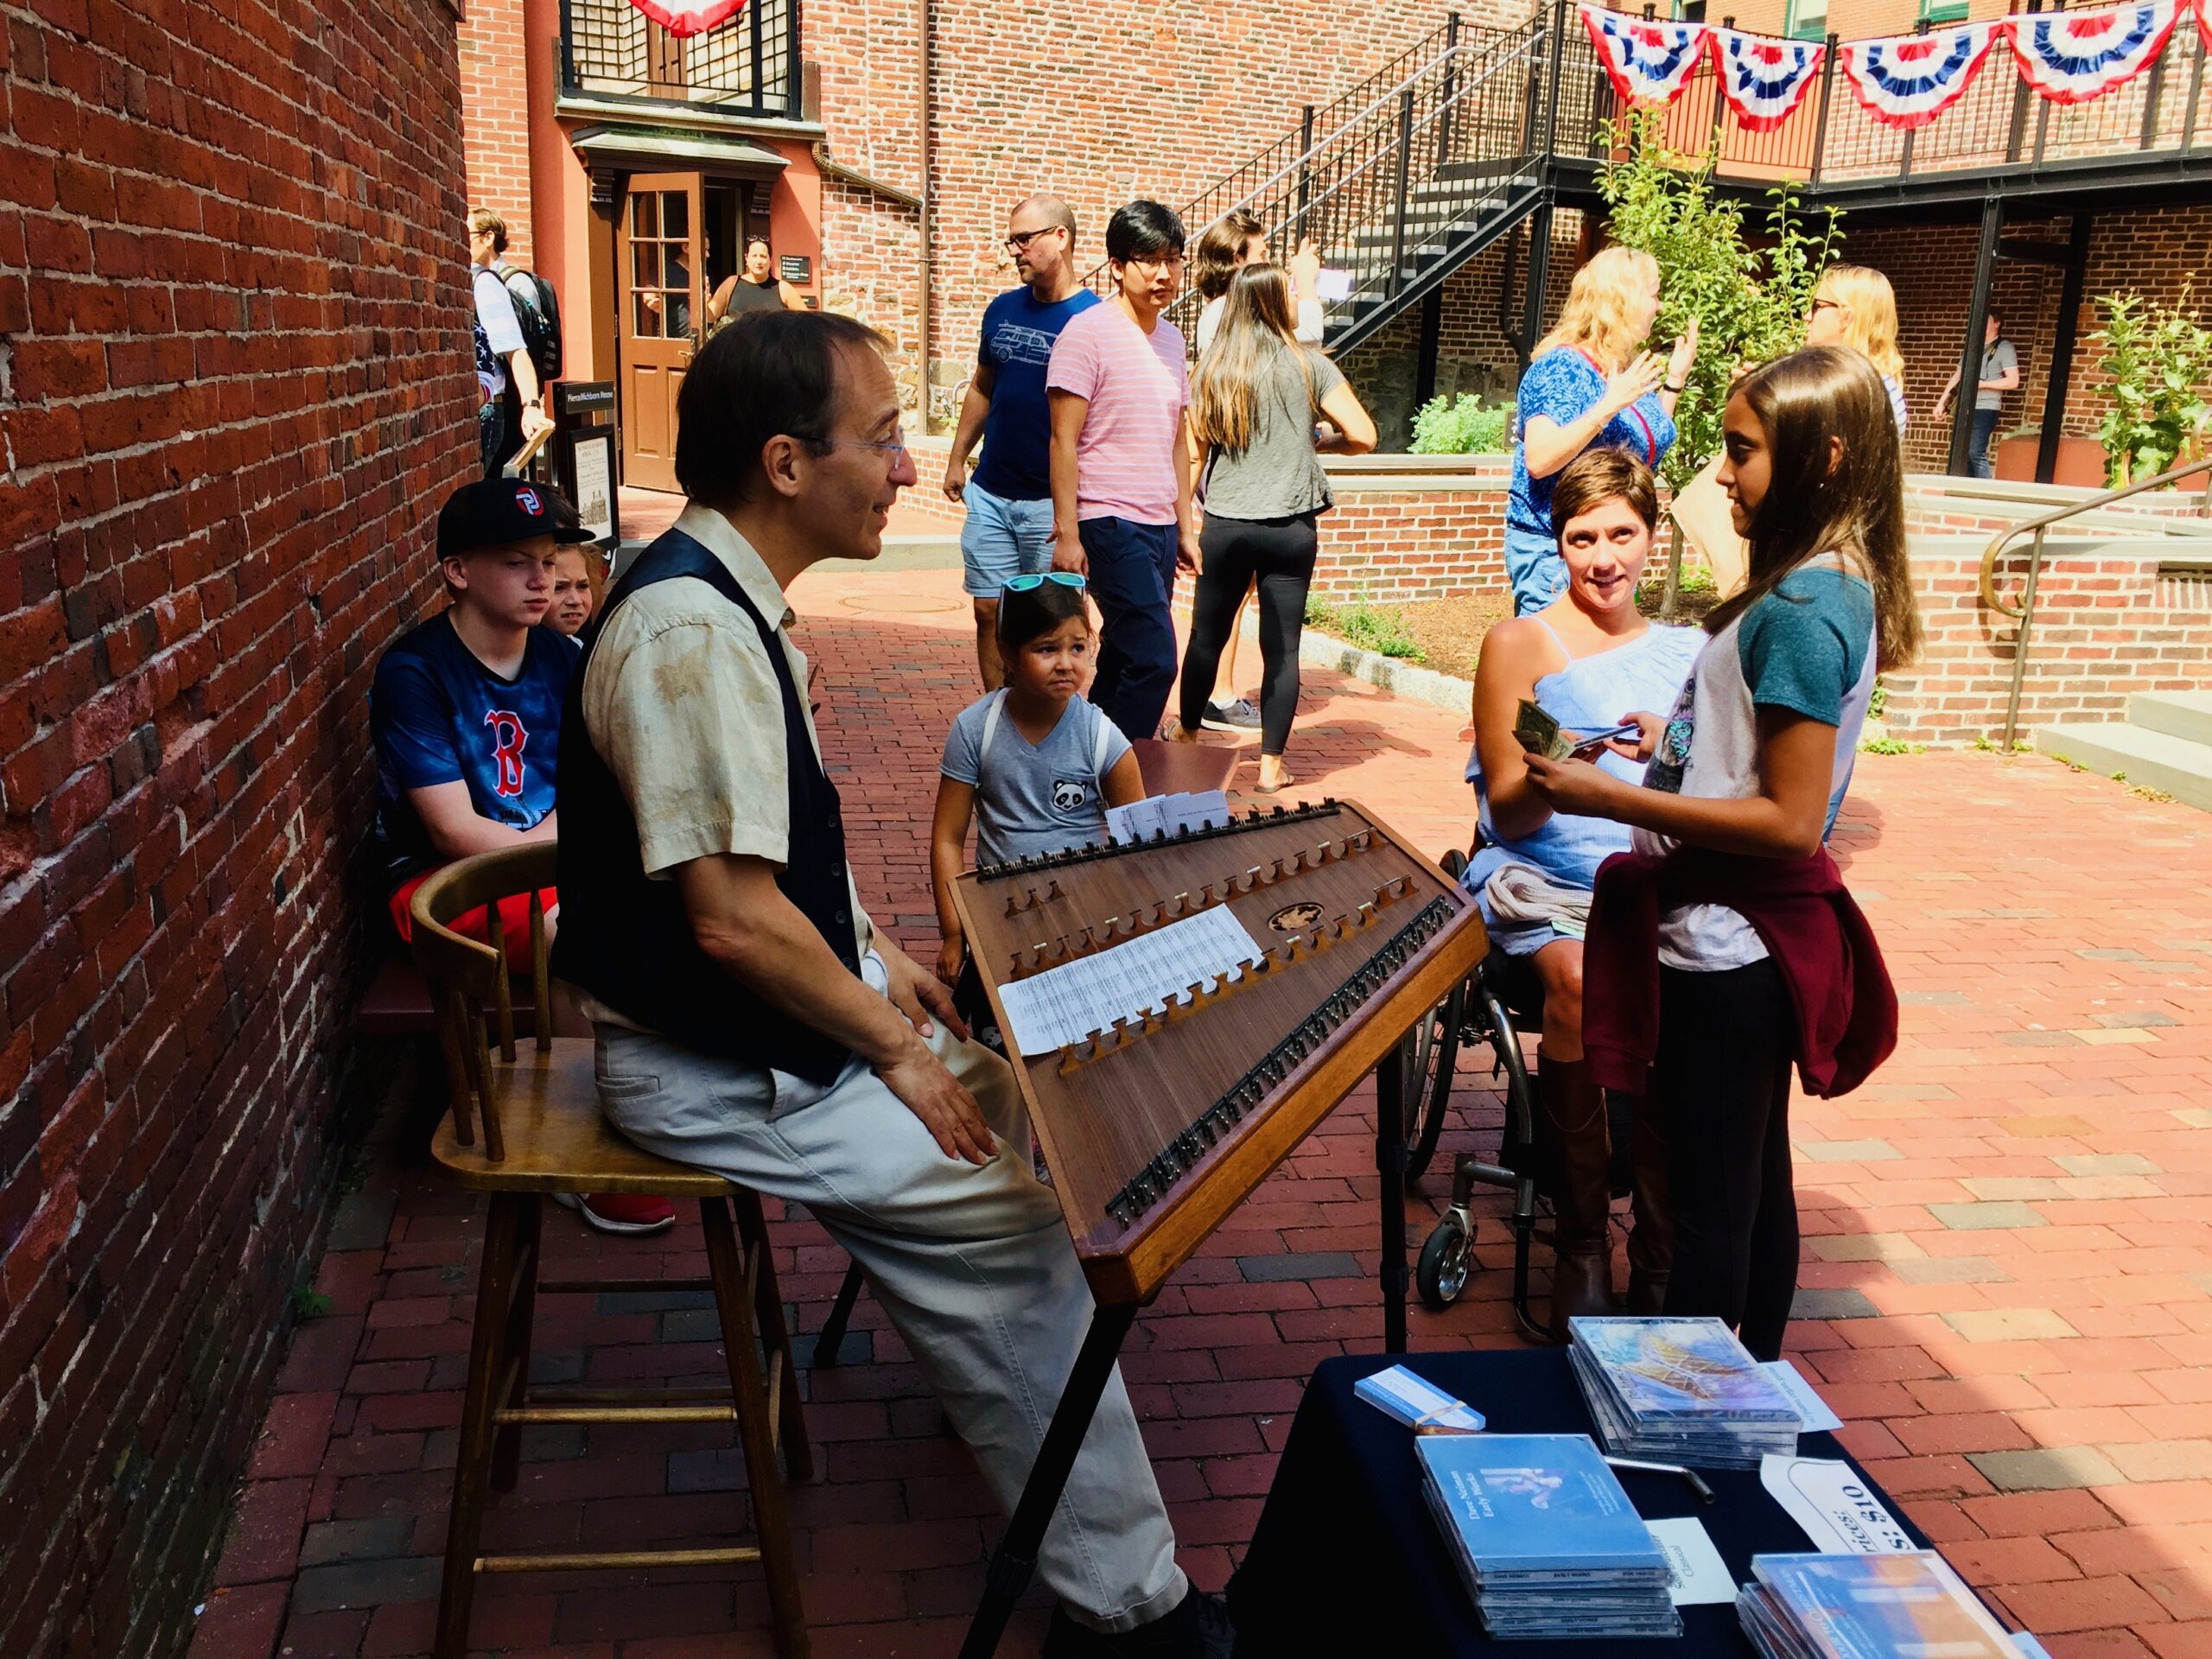 A white middle-aged man playing the hammered dulcimer in the Revere House courtyard for a crowd of visitors